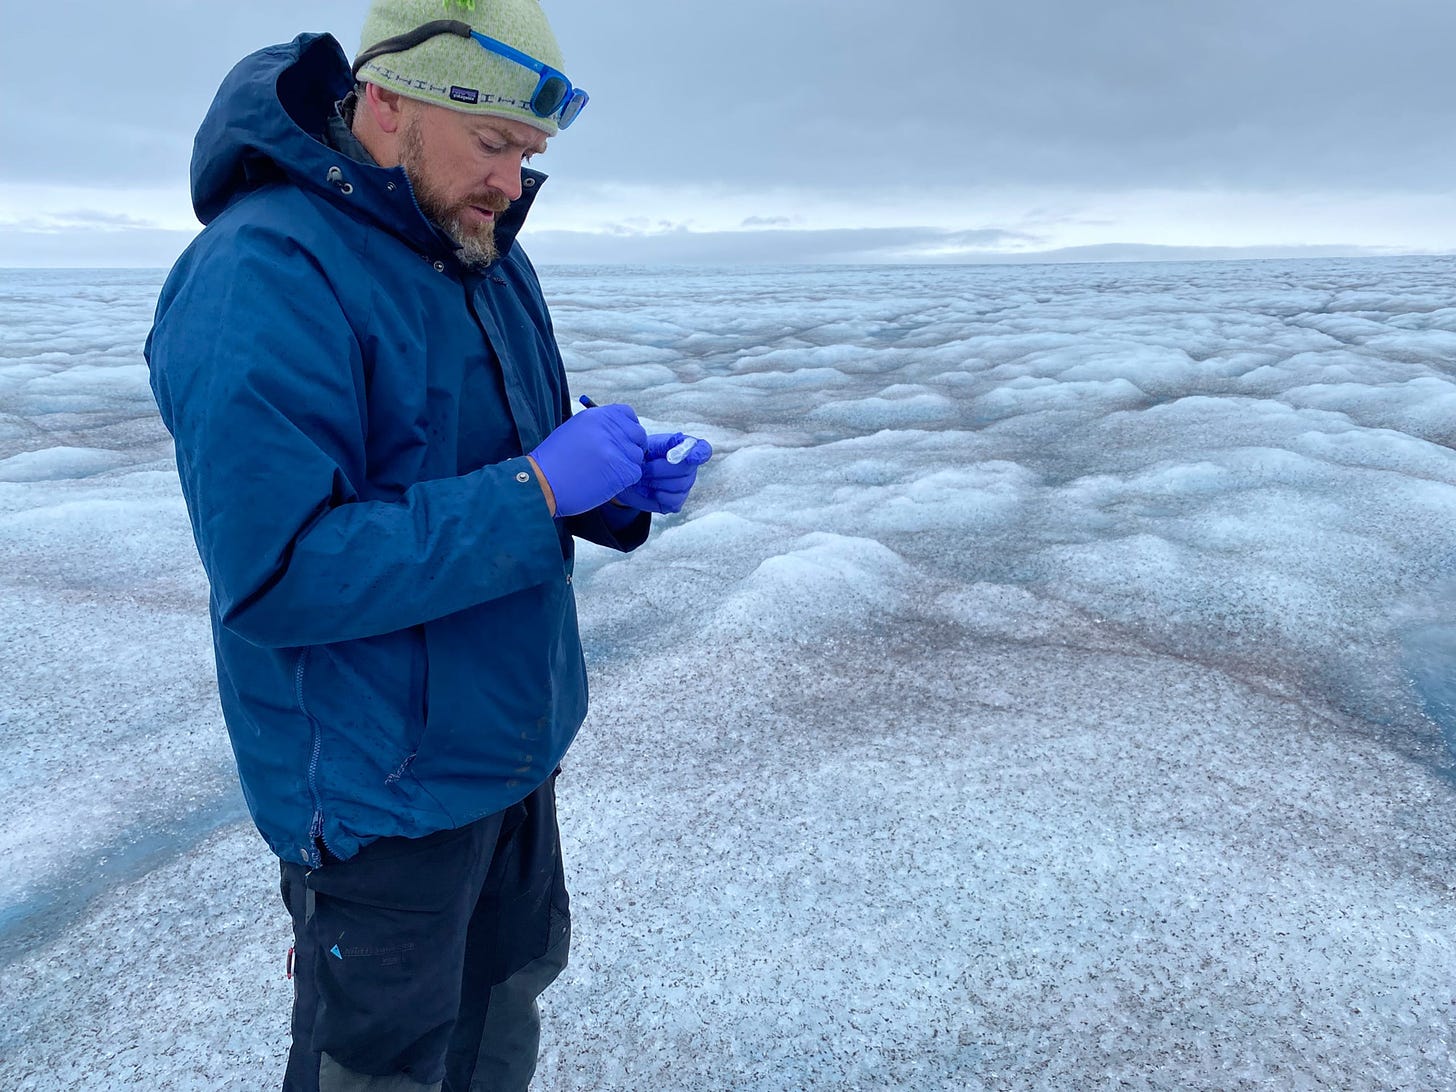 Professor Jason Box takes samples as he stands on exposed ice below the snow line of the Greenland Ice Sheet in West Greenland during the melt season. Box is with the glaciology and climate department at the Geological Survey of Denmark and Greenland.